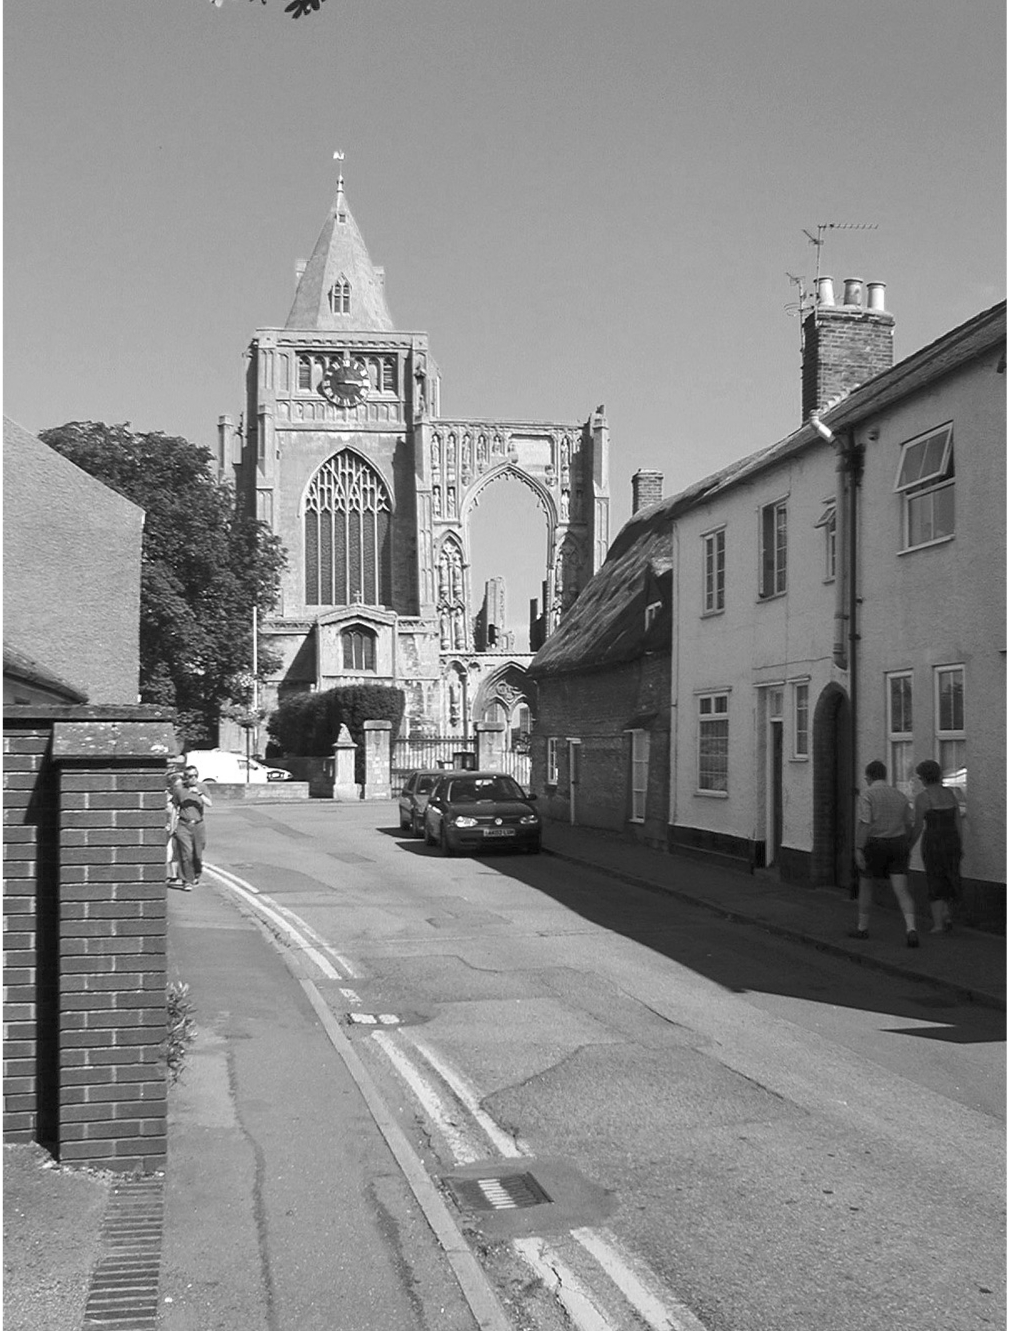 A black and white photograph of a street. There are houses on the right hand side, and at the end is a partially ruined medieval abbey.